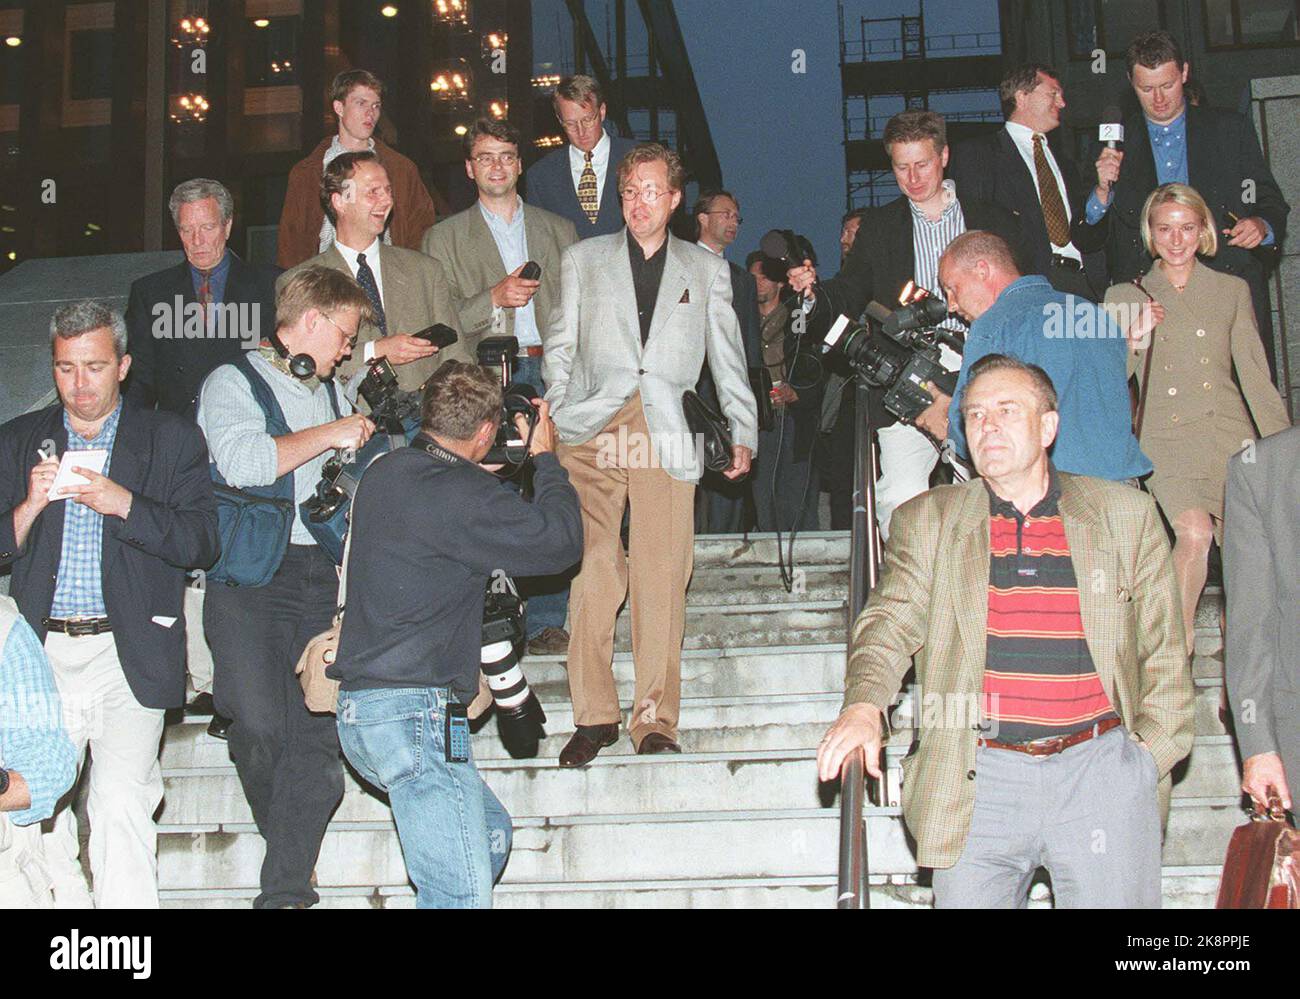 Oslo 19970625: Storebrand's general meeting. Voting on any merger with Kreditkassen (Christiania). Kjell Inge Røkke surrounded by press people after the vote at Storebrand's general meeting. NTB photo: Morten Holm / NTB / Mergers / banking / insurance companies / Stock Photo